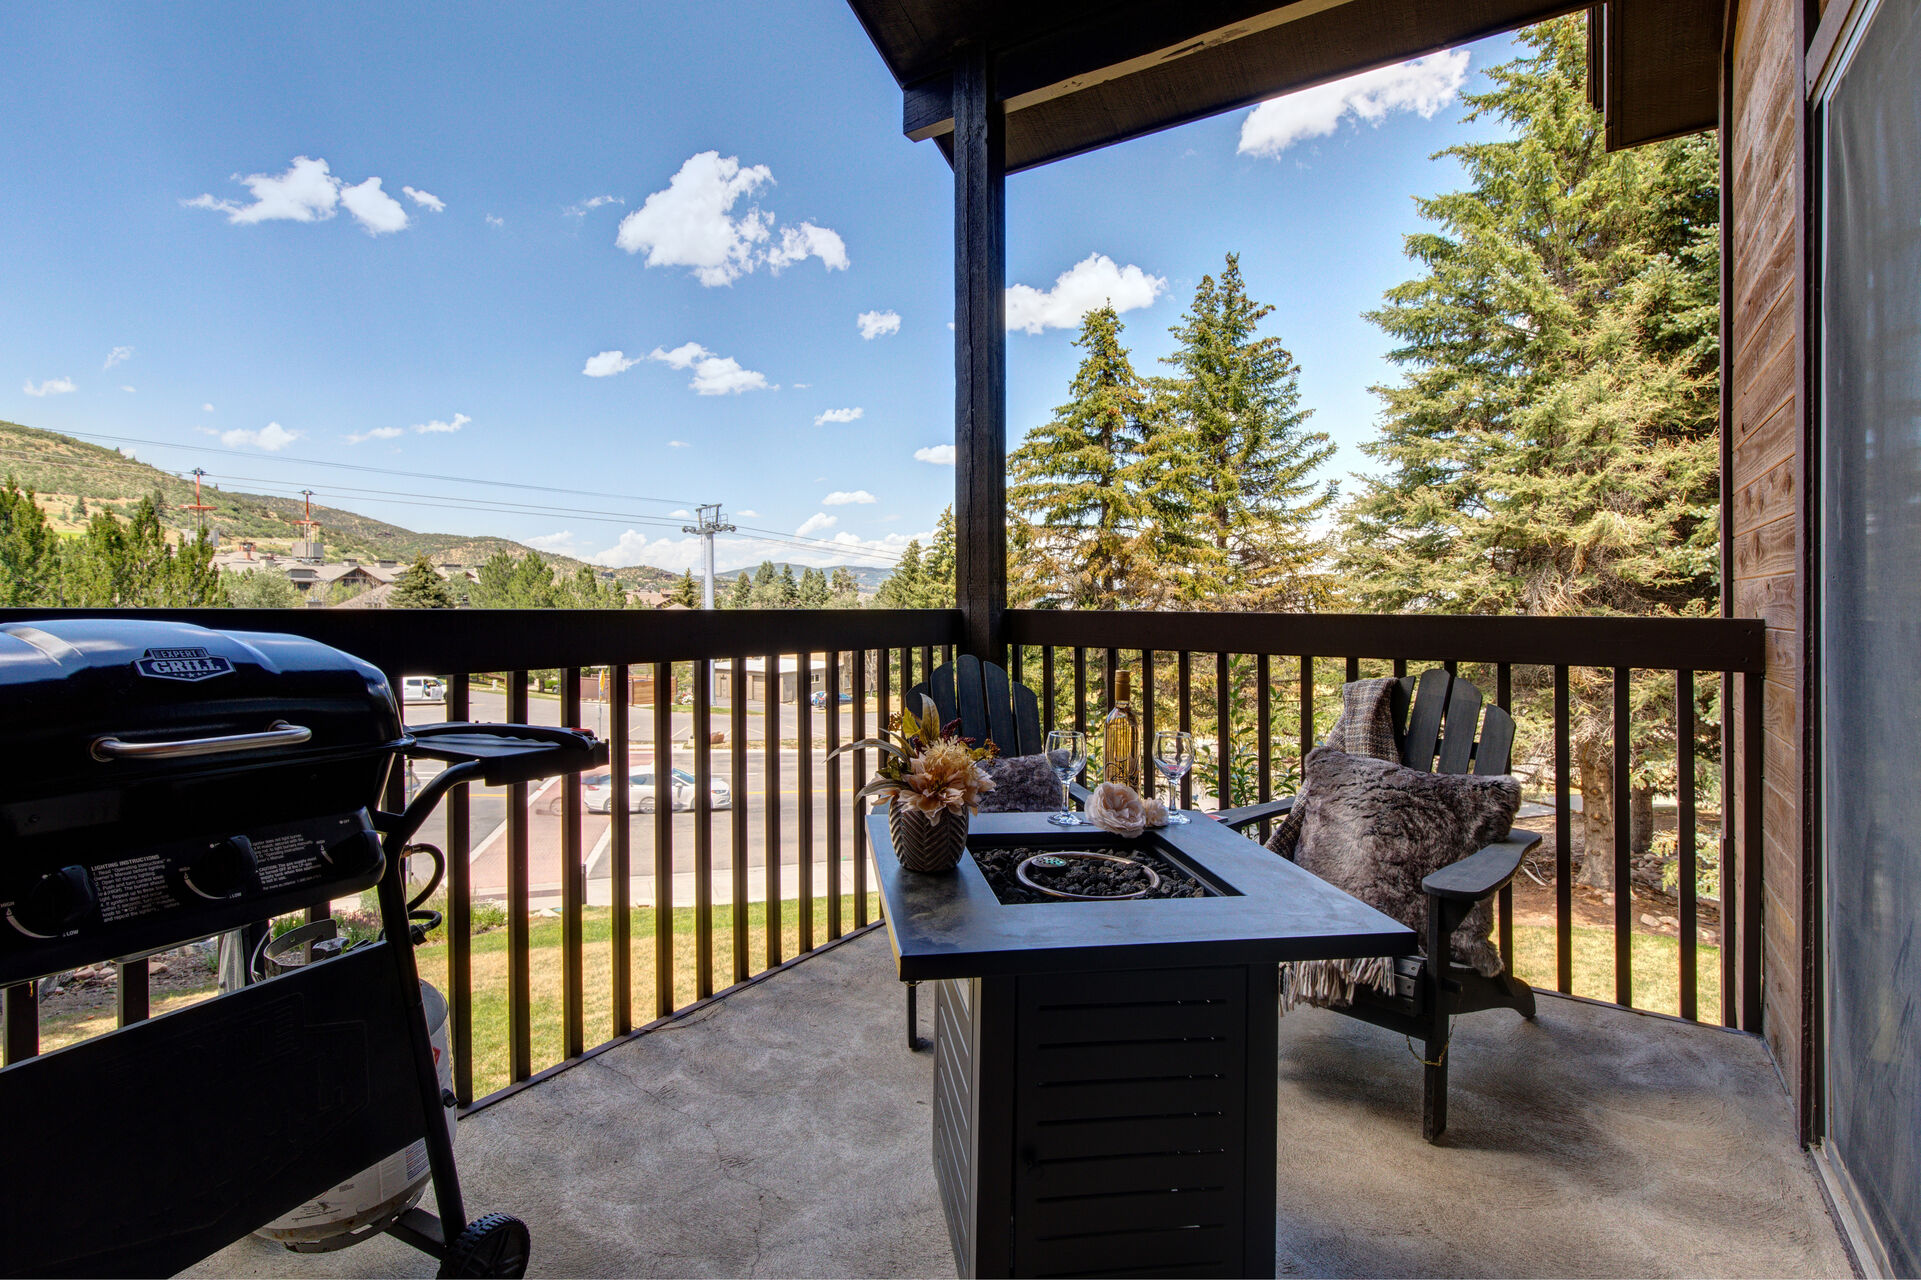 Private deck overlooking the Canyons Cabriolet with BBQ grill, fire-pit, and Adirondack chairs